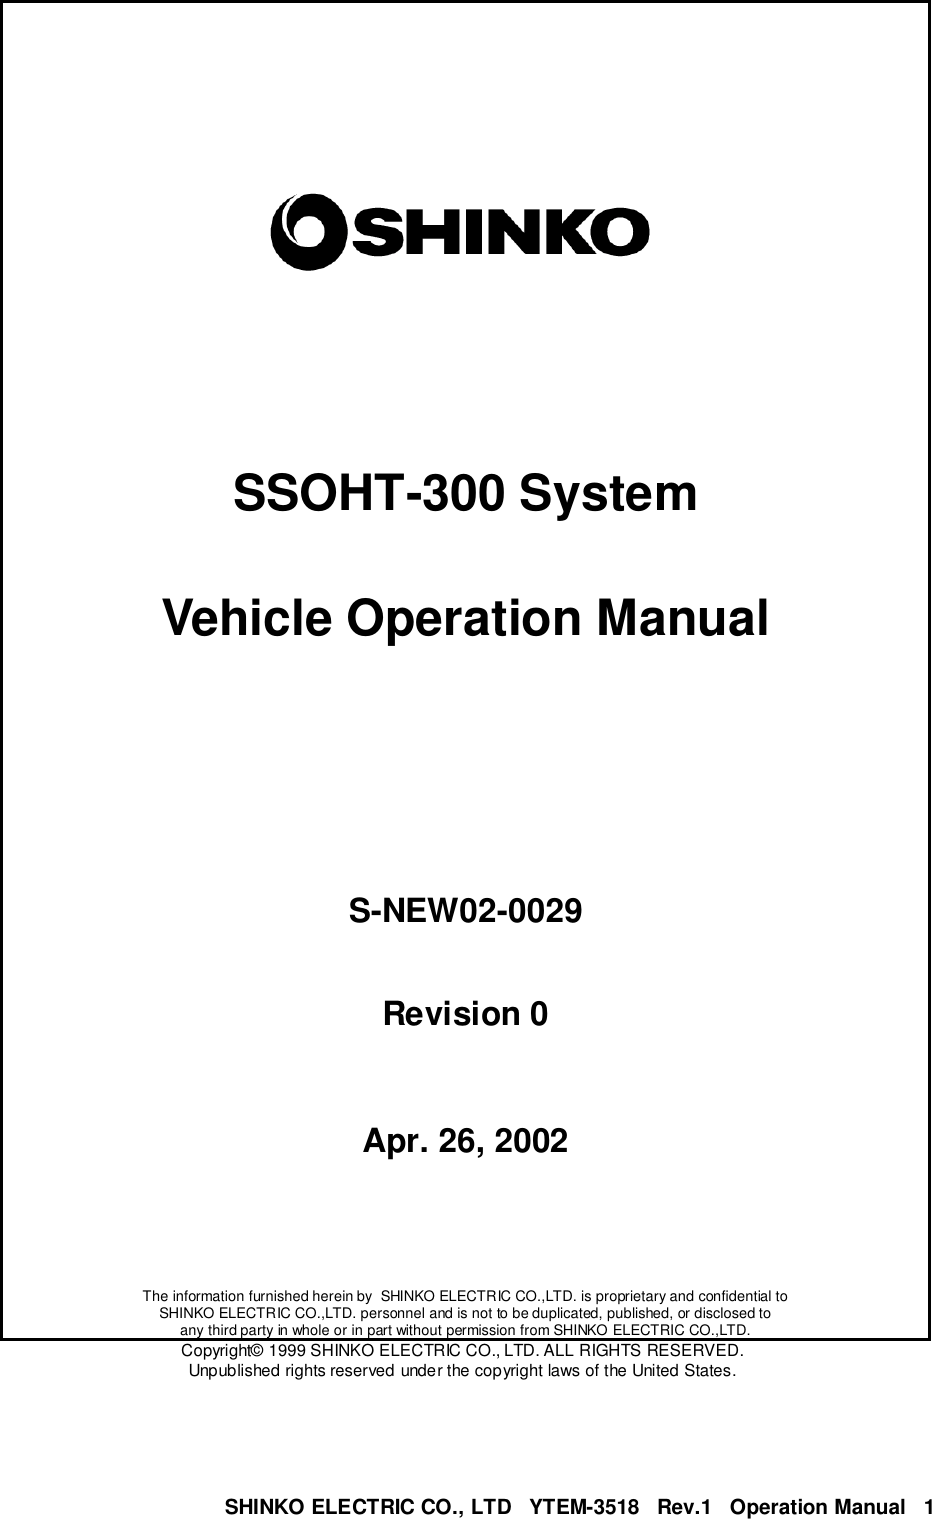 SHINKO ELECTRIC CO., LTD   YTEM-3518   Rev.1   Operation Manual   1SSOHT-300 SystemVehicle Operation ManualS-NEW02-0029Revision 0Apr. 26, 2002The information furnished herein by  SHINKO ELECTRIC CO.,LTD. is proprietary and confidential toSHINKO ELECTRIC CO.,LTD. personnel and is not to be duplicated, published, or disclosed toany third party in whole or in part without permission from SHINKO ELECTRIC CO.,LTD.Copyright© 1999 SHINKO ELECTRIC CO., LTD. ALL RIGHTS RESERVED.Unpublished rights reserved under the copyright laws of the United States.